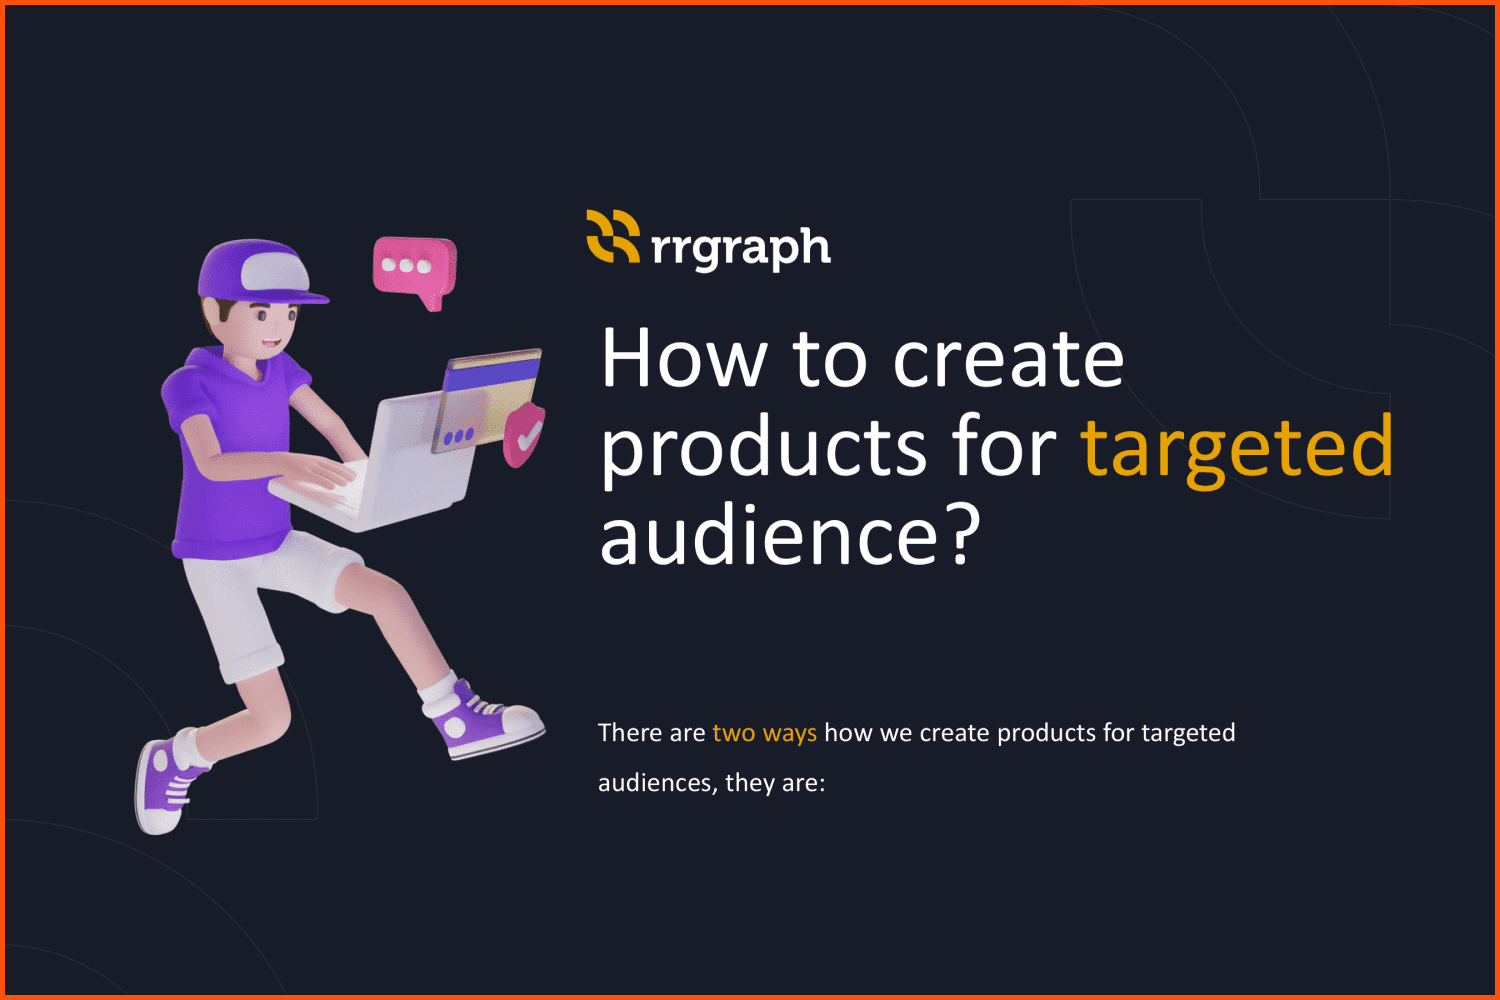 How to create products for the targeted audience.